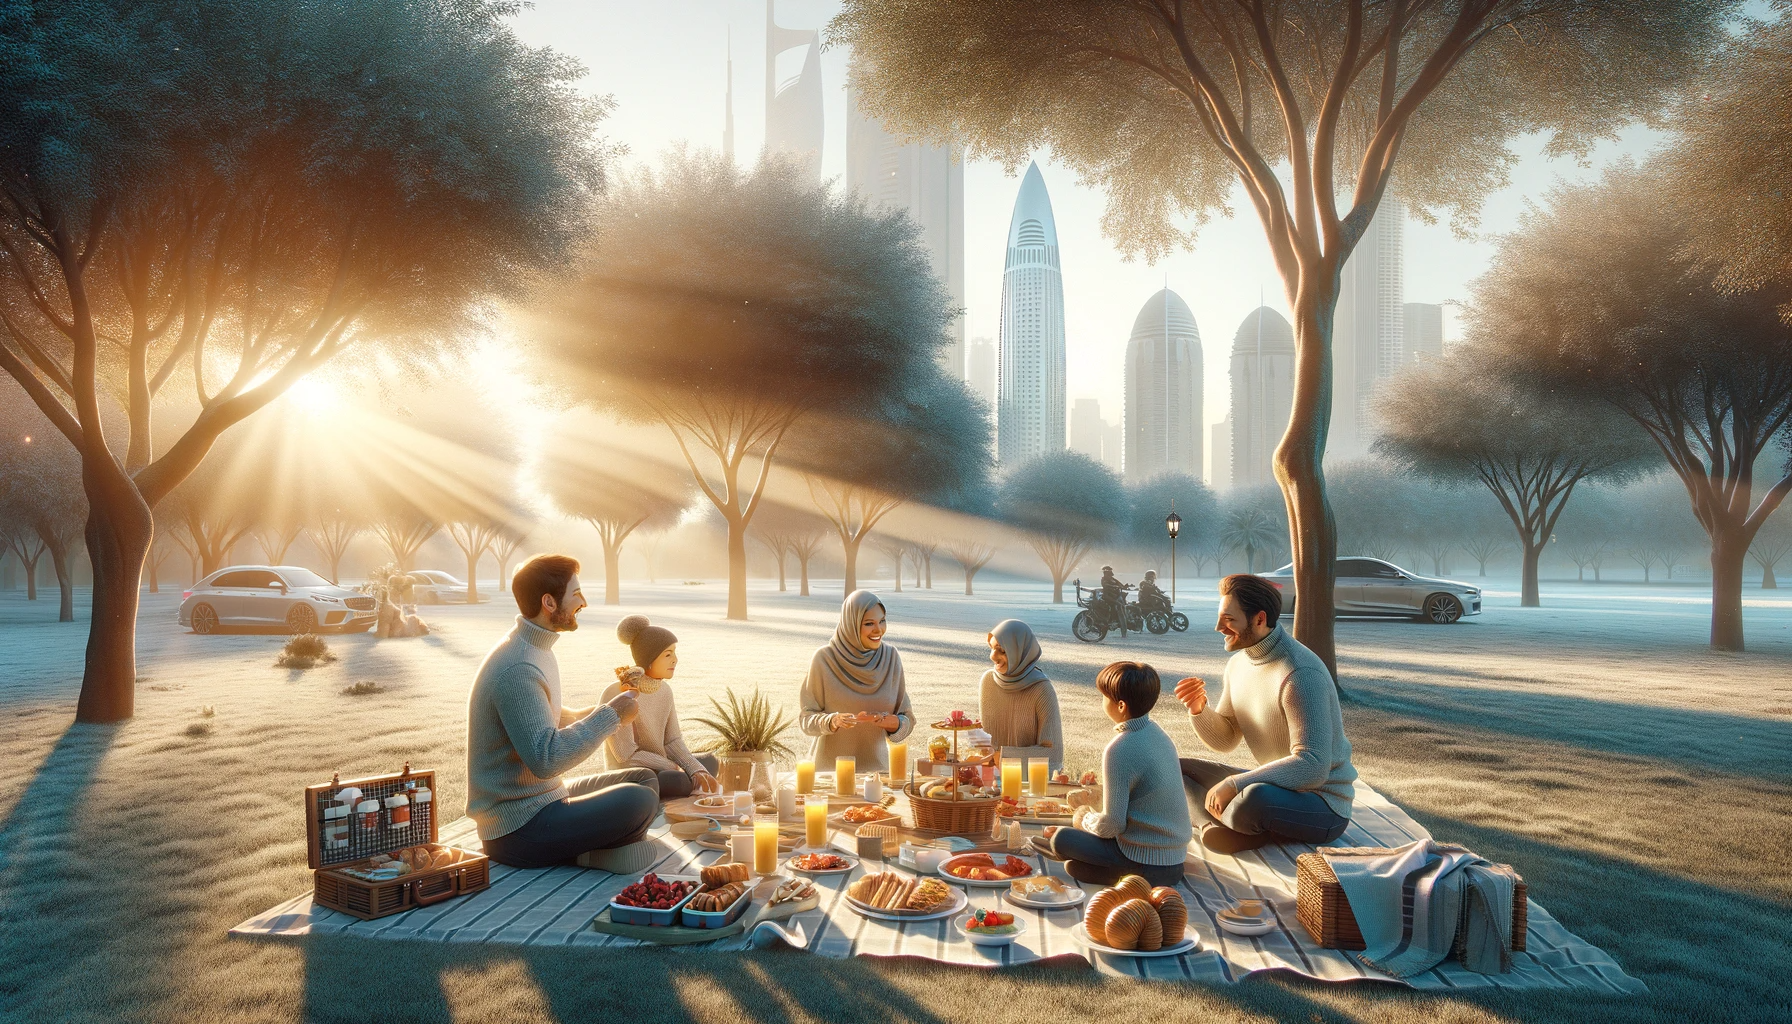 DALL·E 2024 01 19 15.55.26 Create a realistic image depicting a family enjoying a breakfast outdoors in a UAE park during winter. The setting should convey a relaxed morning atm